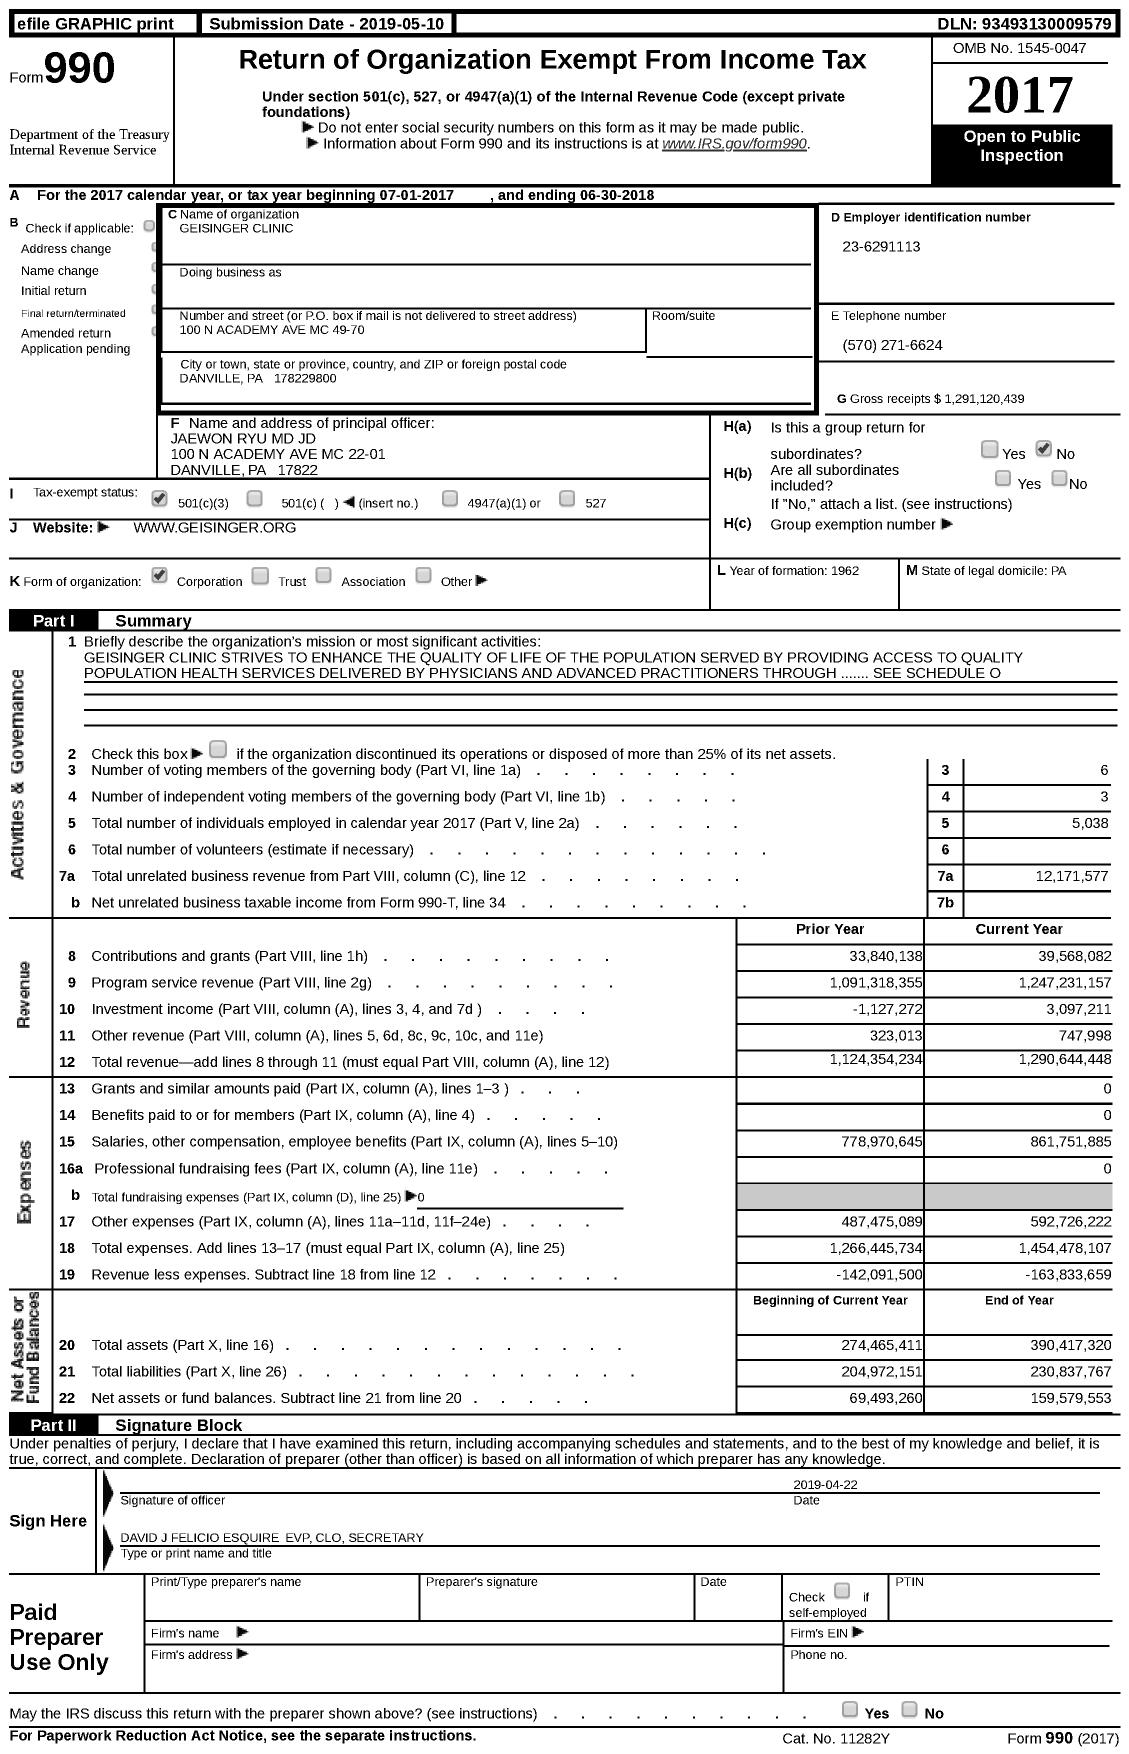 Image of first page of 2017 Form 990 for Geisinger Health System (GHS)